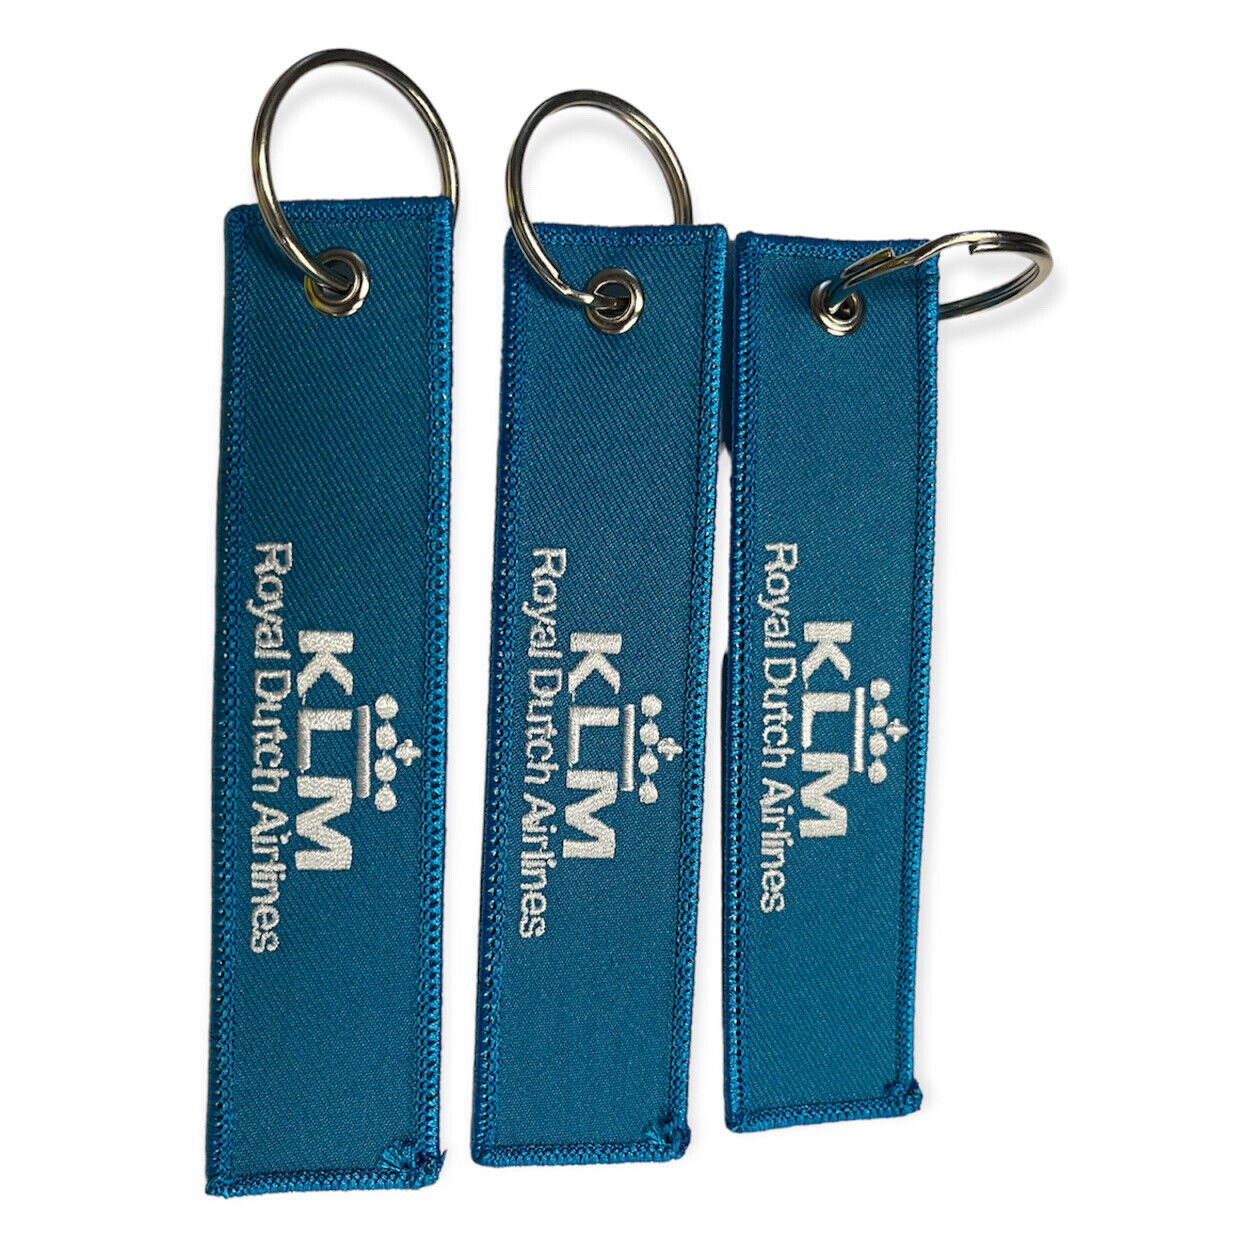 New Set 3 Keychain KLM - 130*30mm twill+embroidery logo on both sides